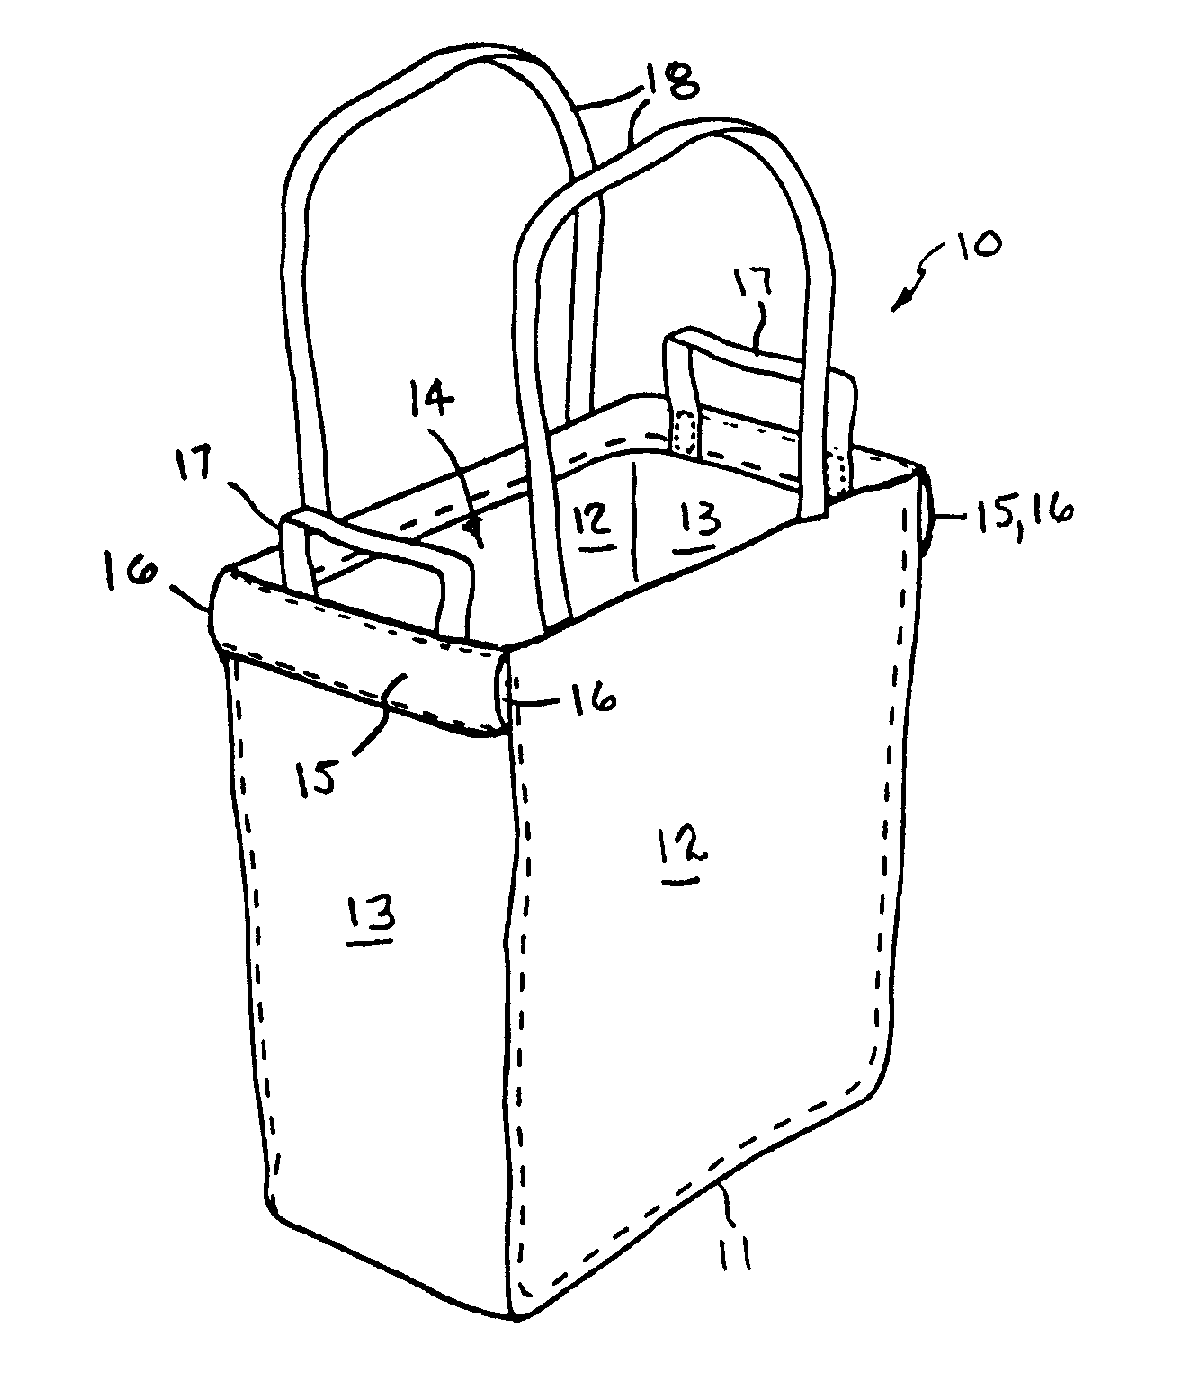 Reusable shopping bag and cart system for improved register checkout